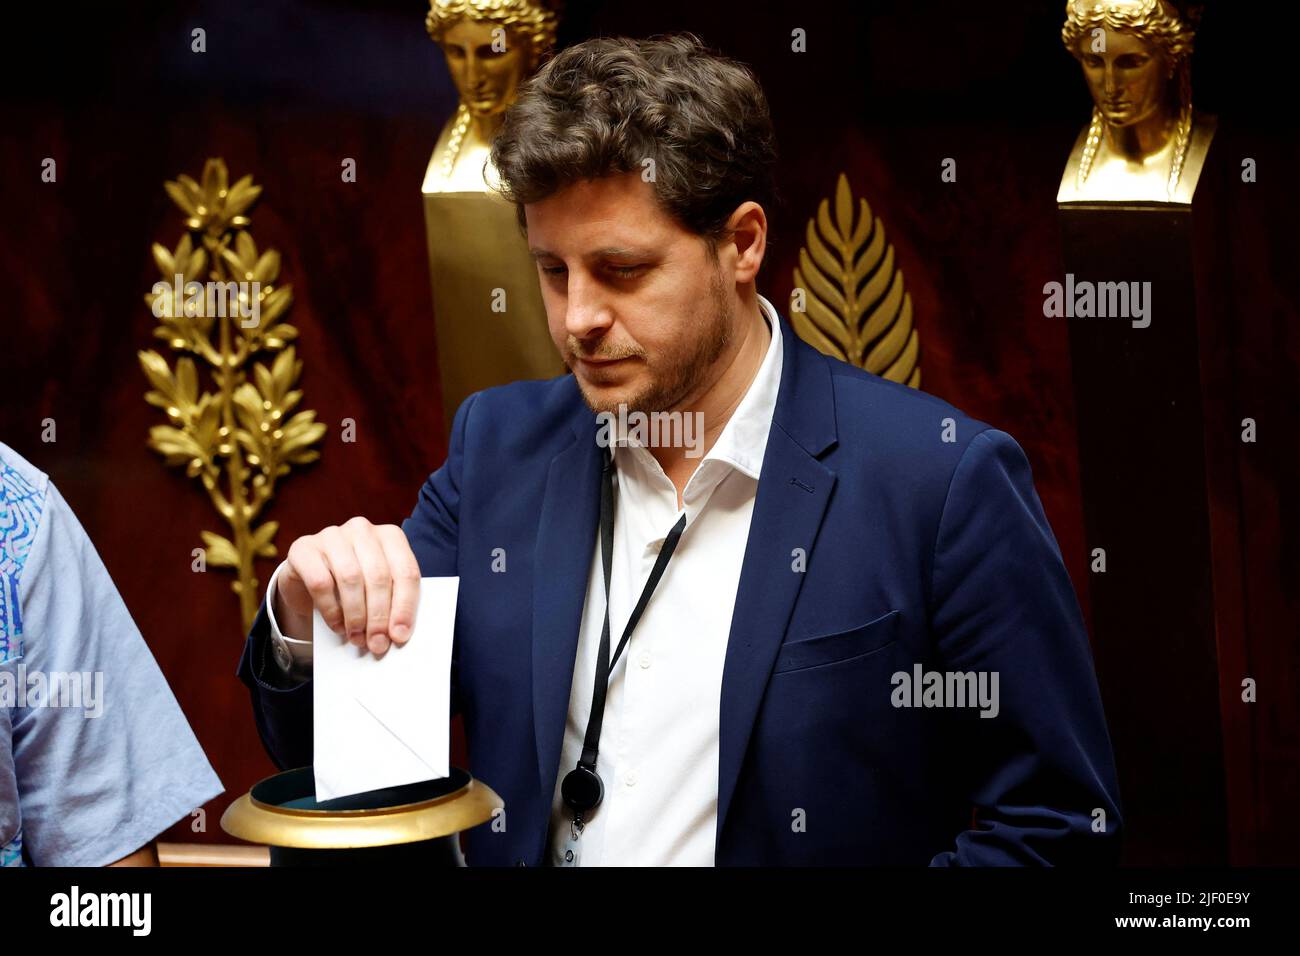 Julien Bayou, MP and co-president of the ecologist party Europe-Ecologie Les Verts (EELV) parliamentary group, votes during the opening session of the National Assembly in Paris, France, June 28, 2022. REUTERS/Sarah Meyssonnier Stock Photo